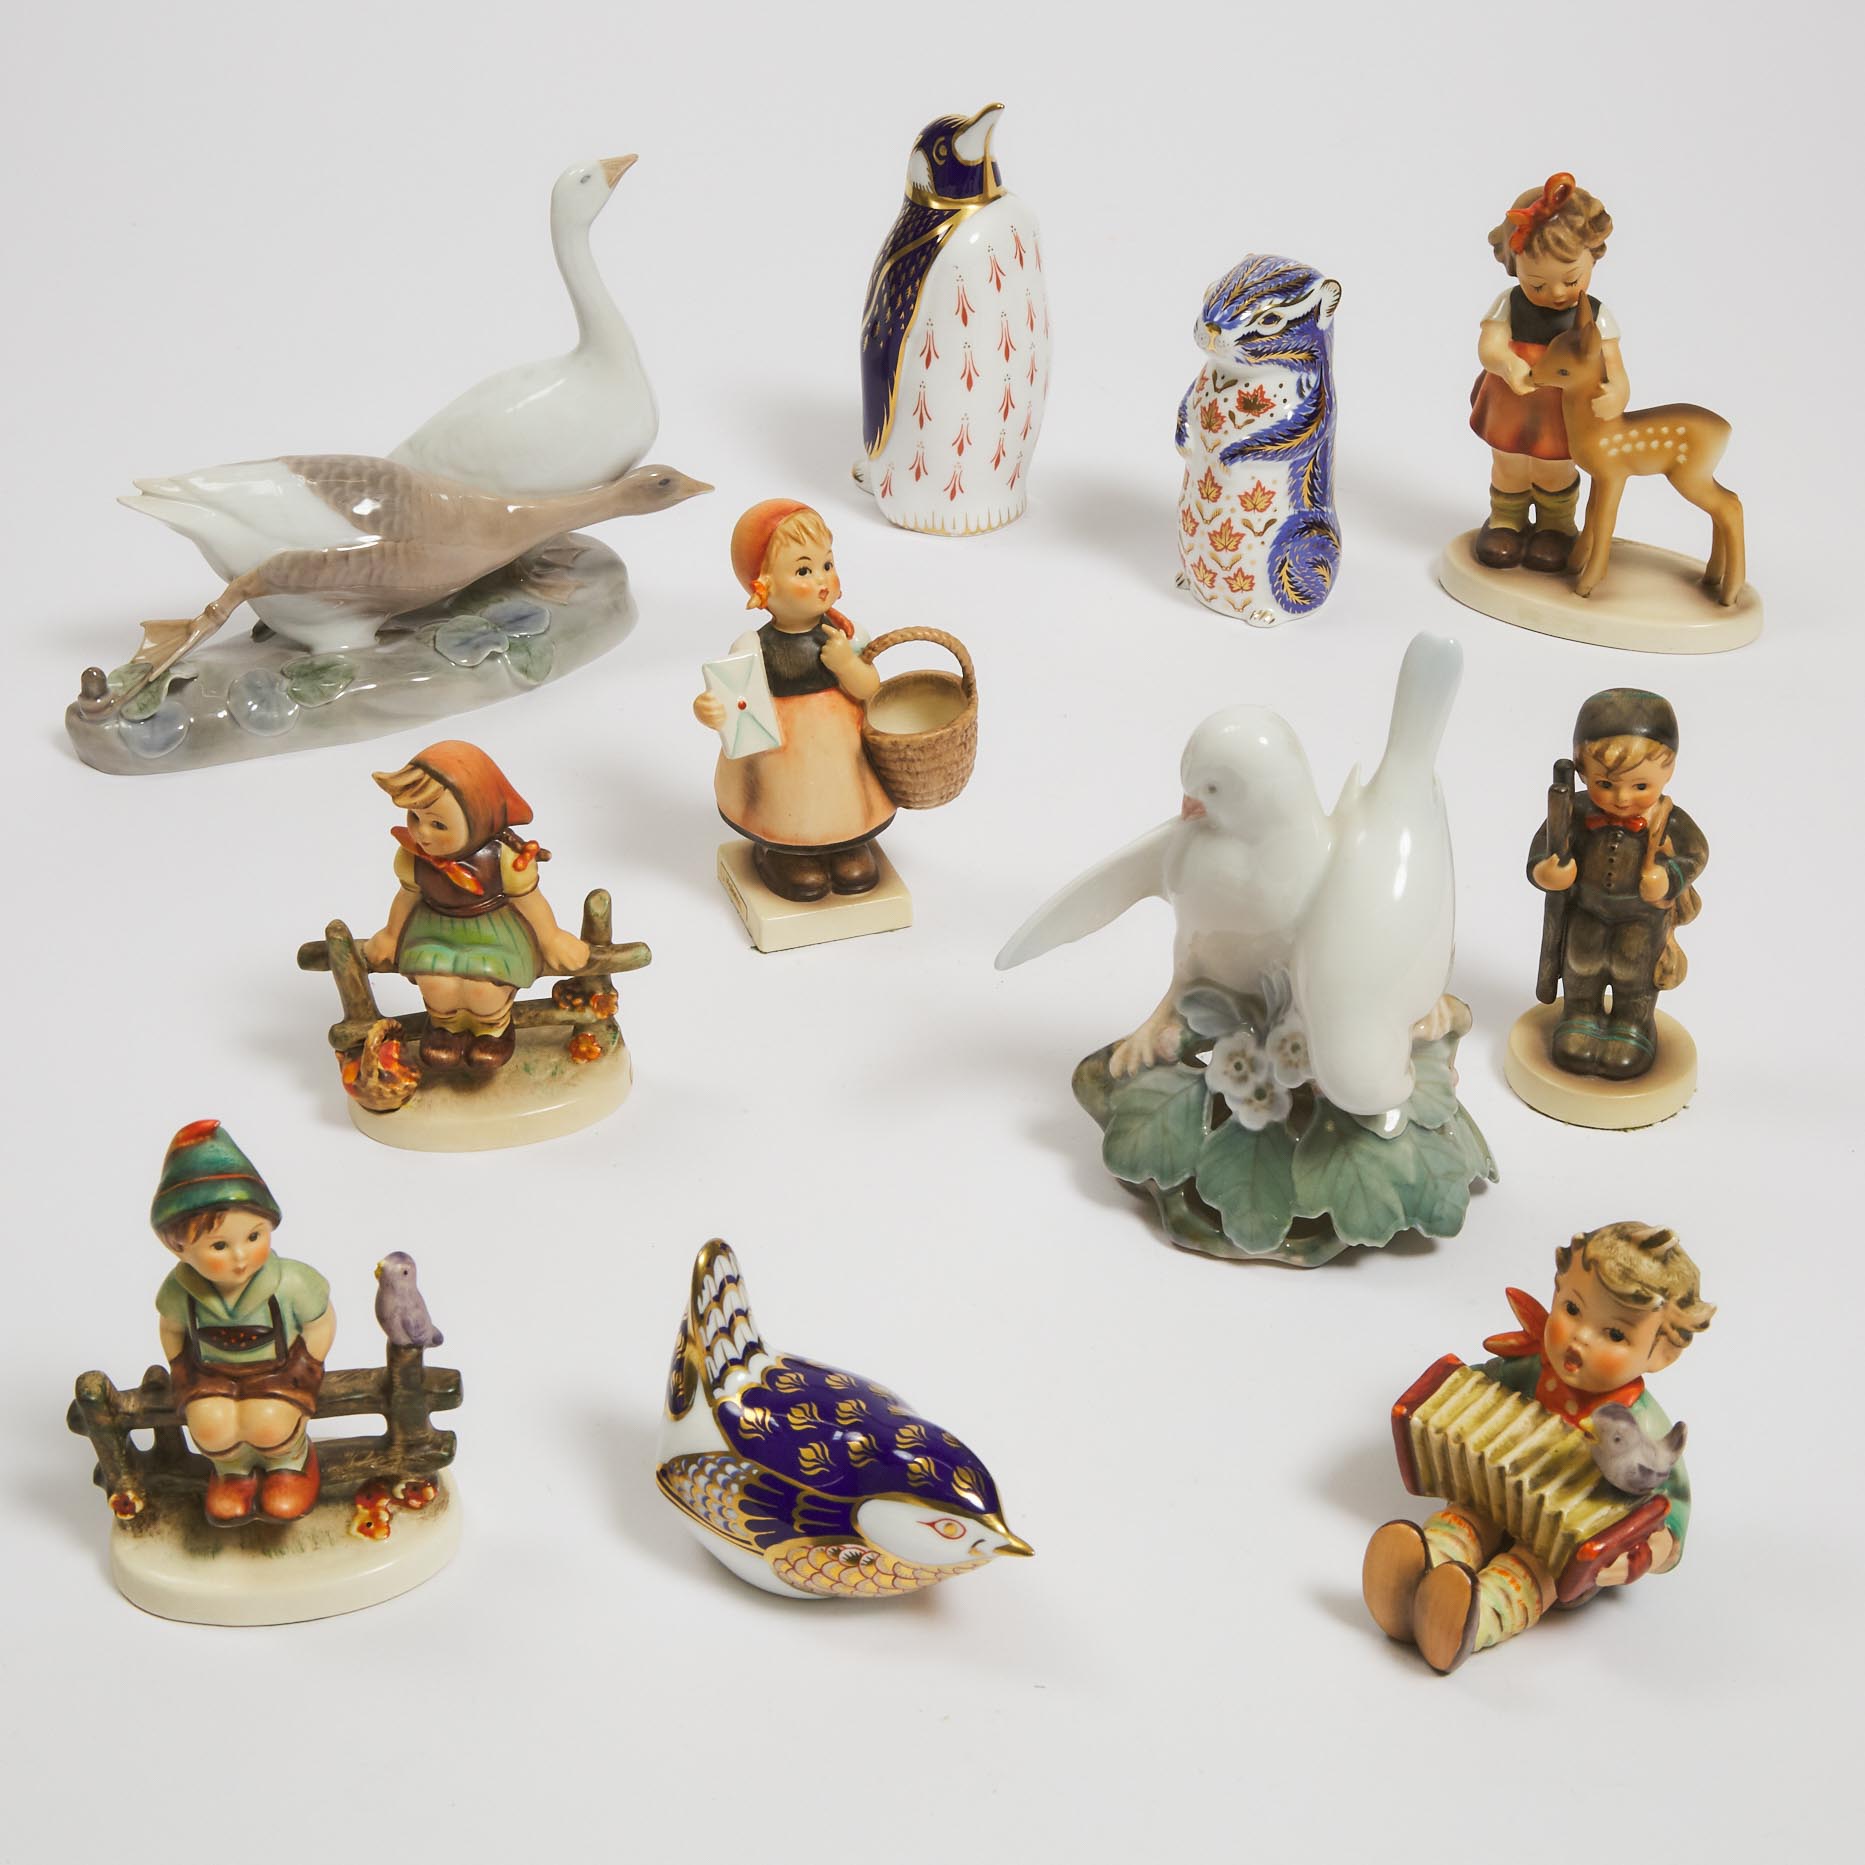 Two Royal Copenhagen Bird Groups, Royal Crown Derby Penguin, Sparrow and a Squirrel, and Six Hummel Figures of Children, 20th century